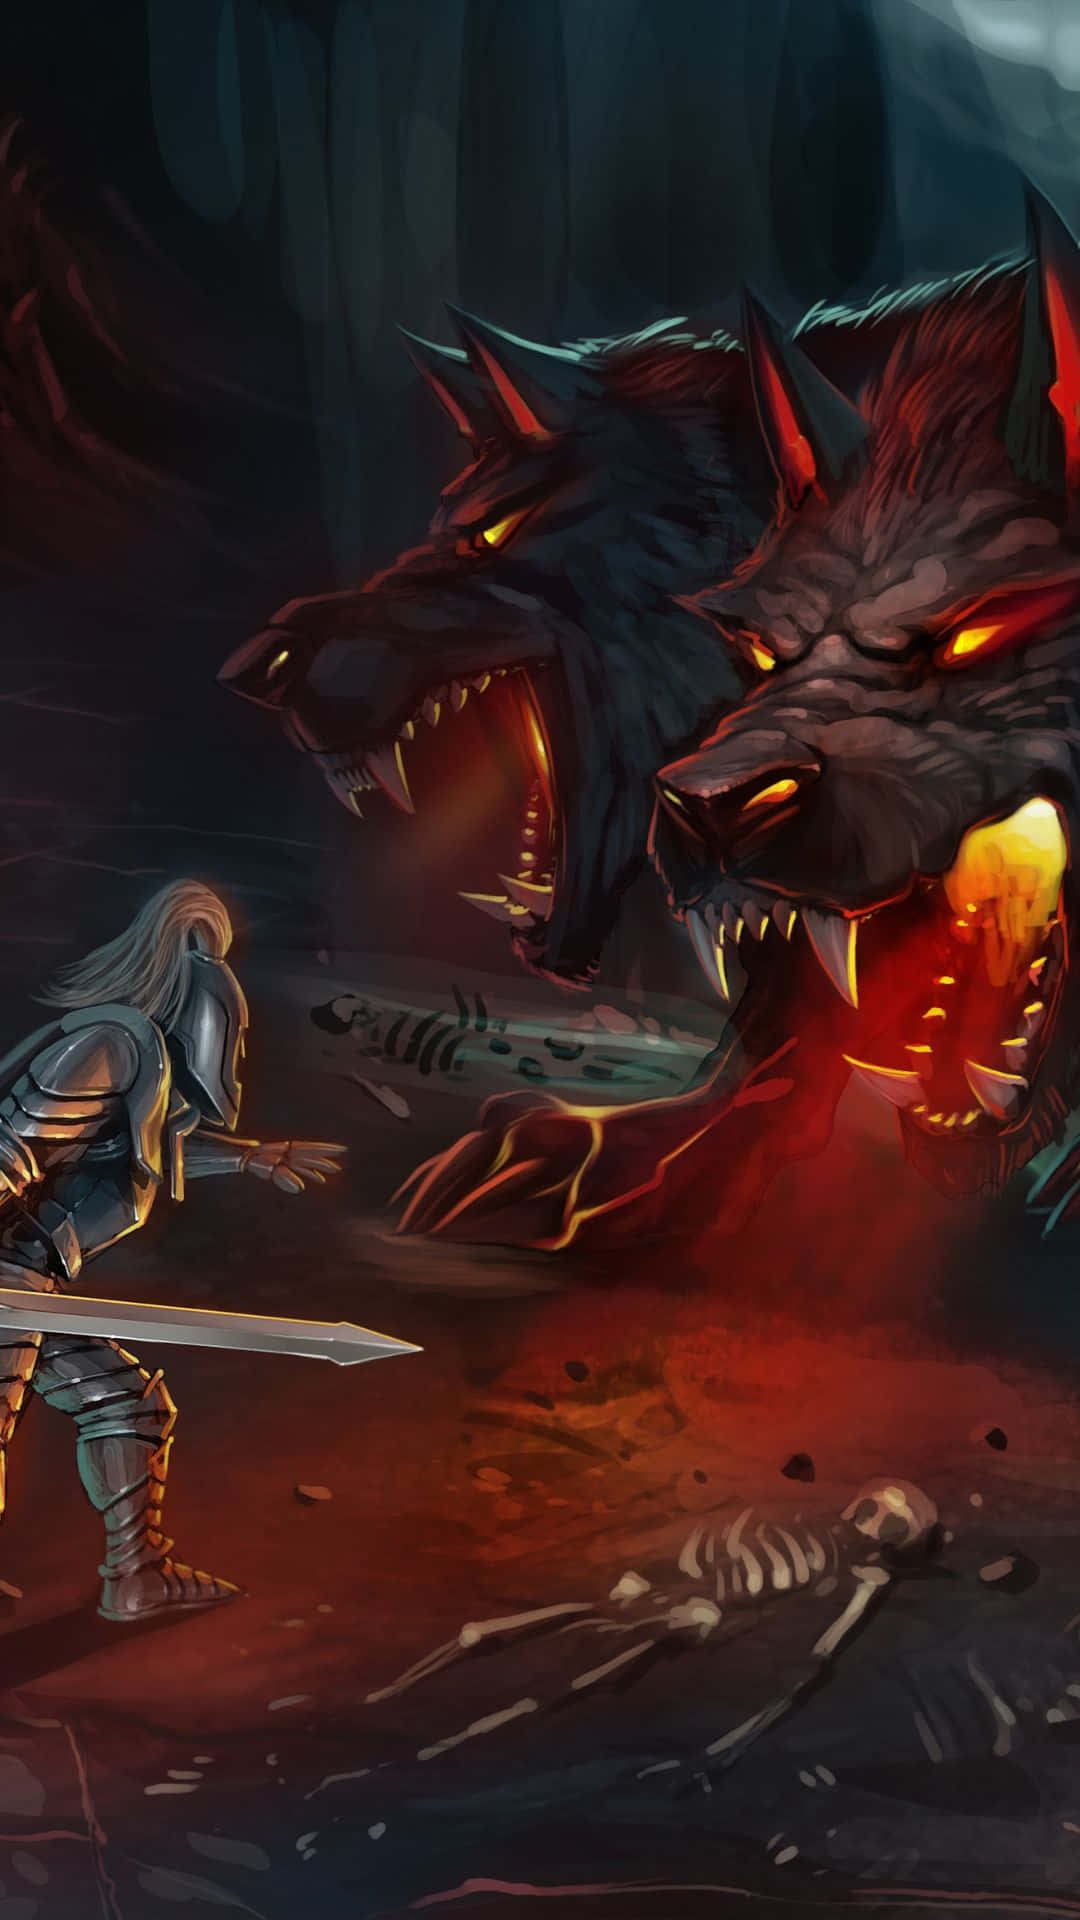 A Man Is Fighting A Wolf In A Dark Cave